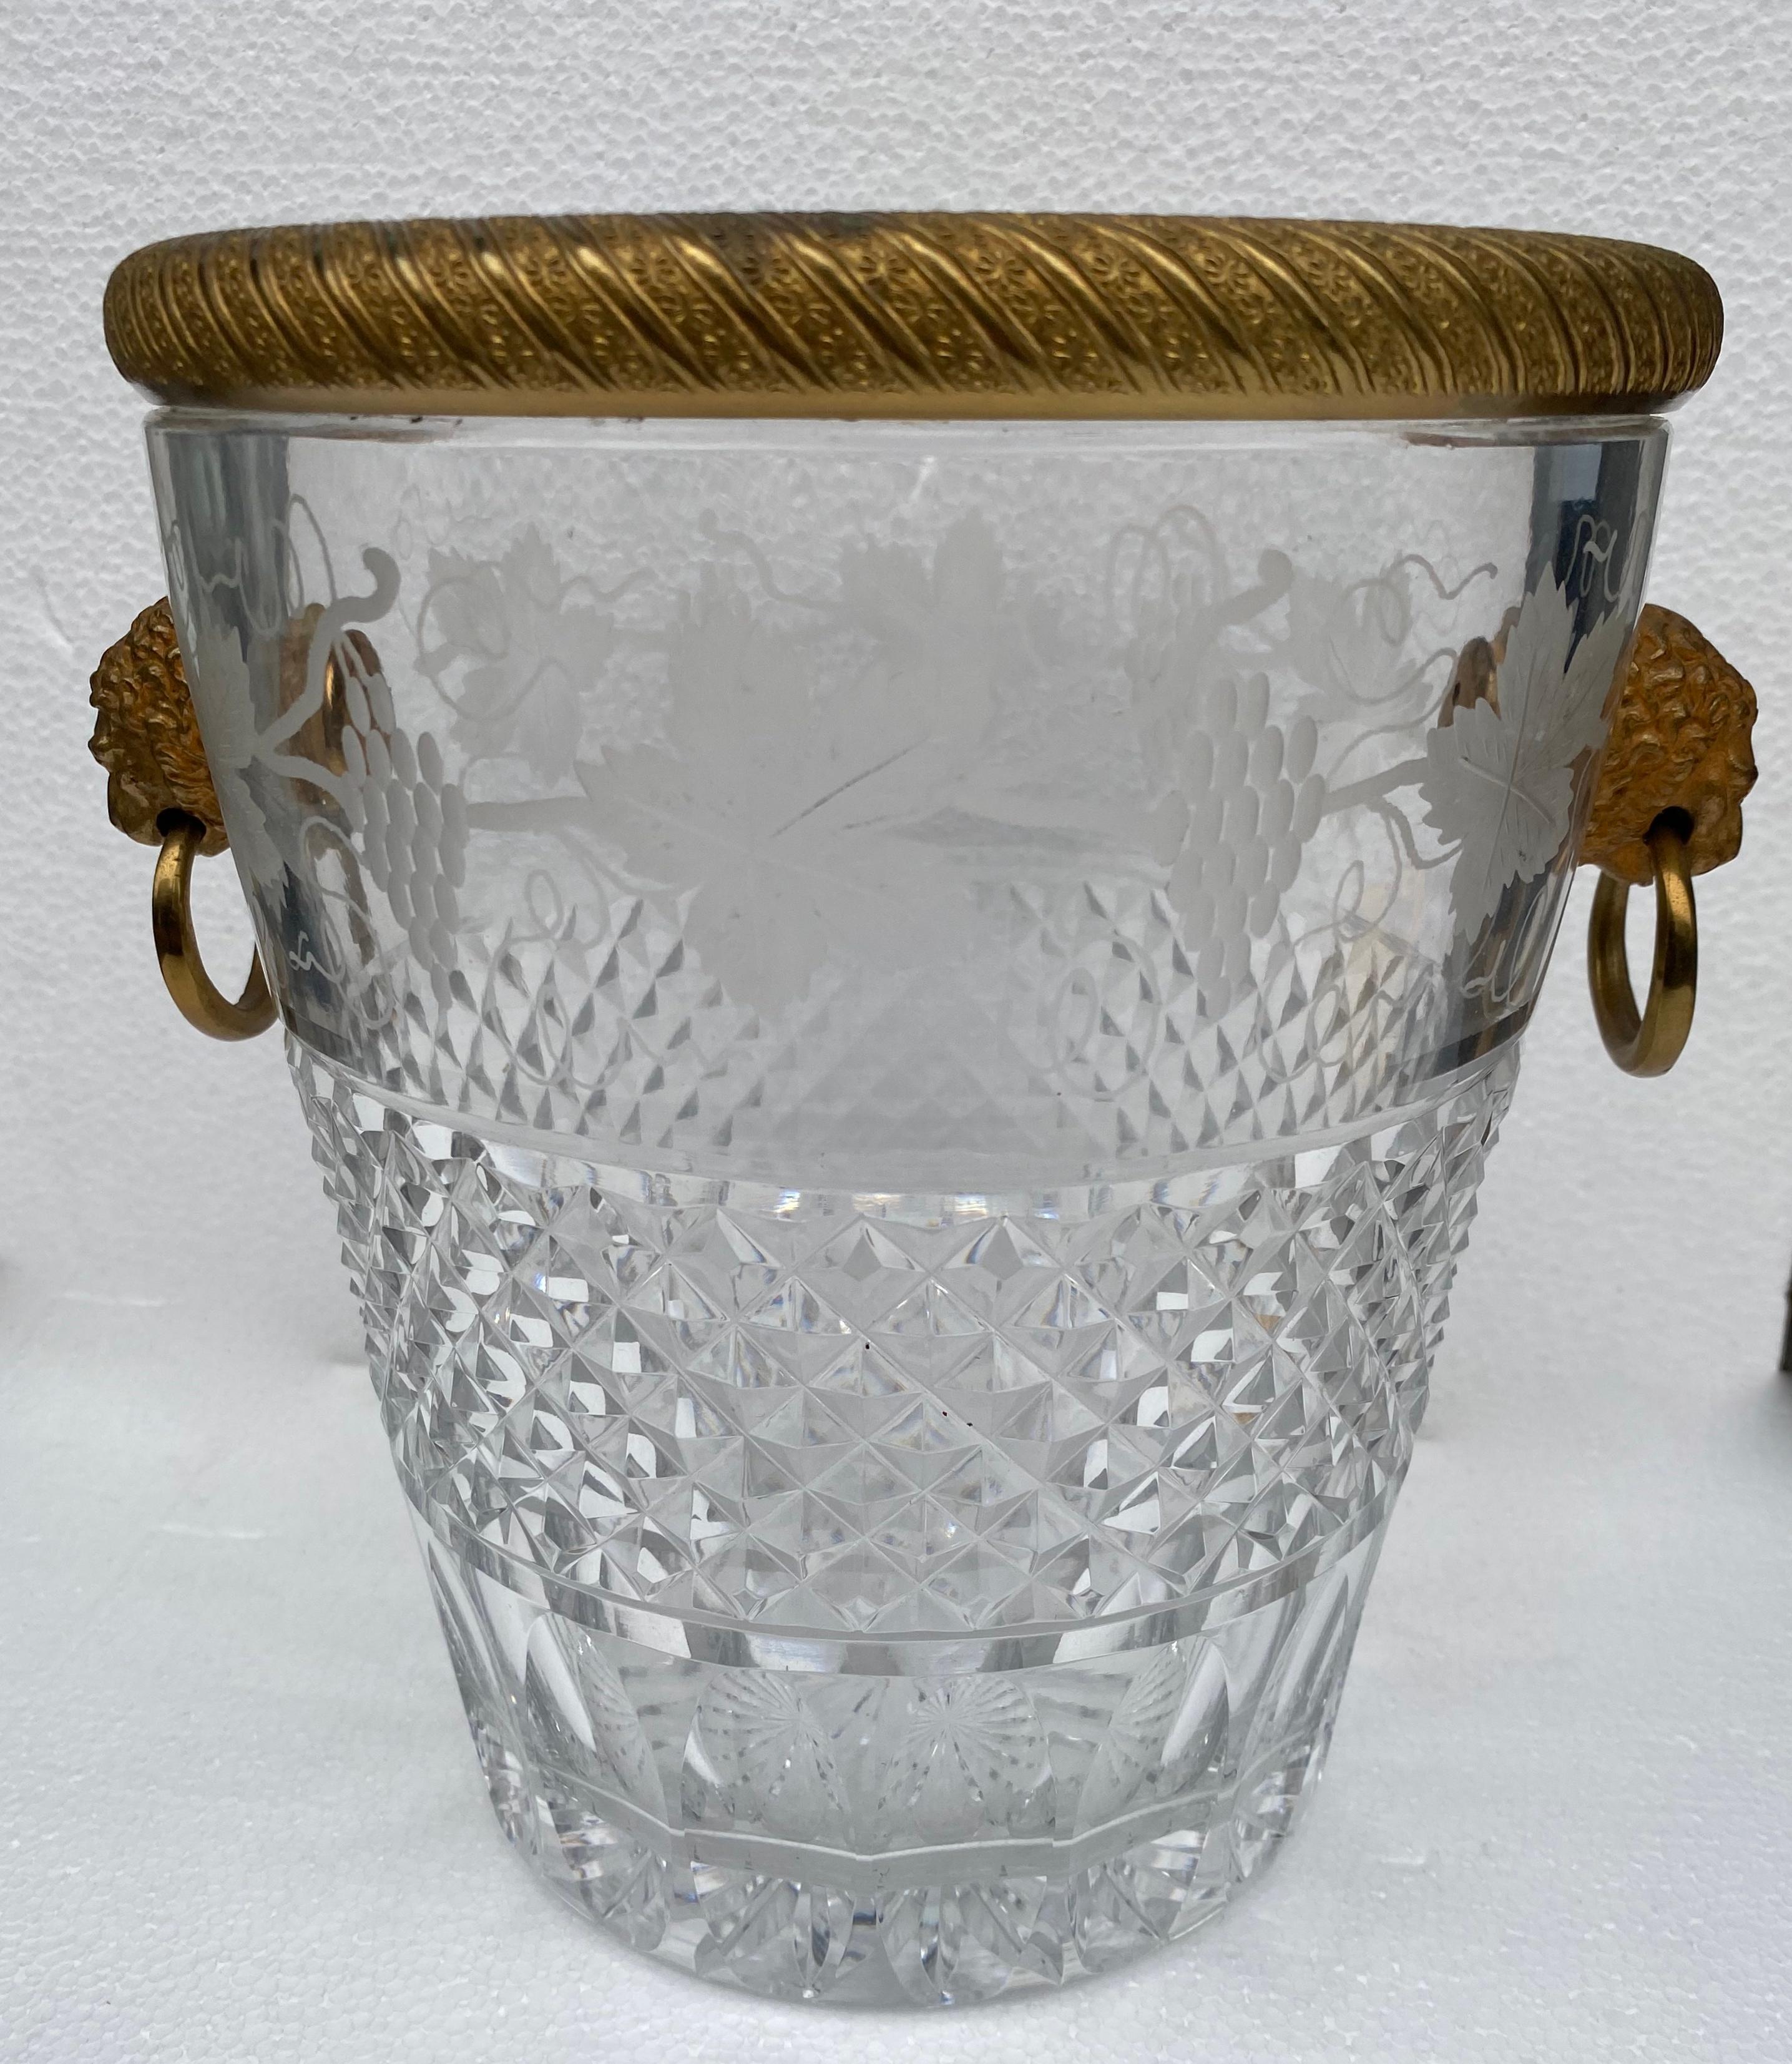 Neoclassical 1950-1970 Champagne Bucket Crystal St Louis and Bronze Gilded Heads of Lion For Sale